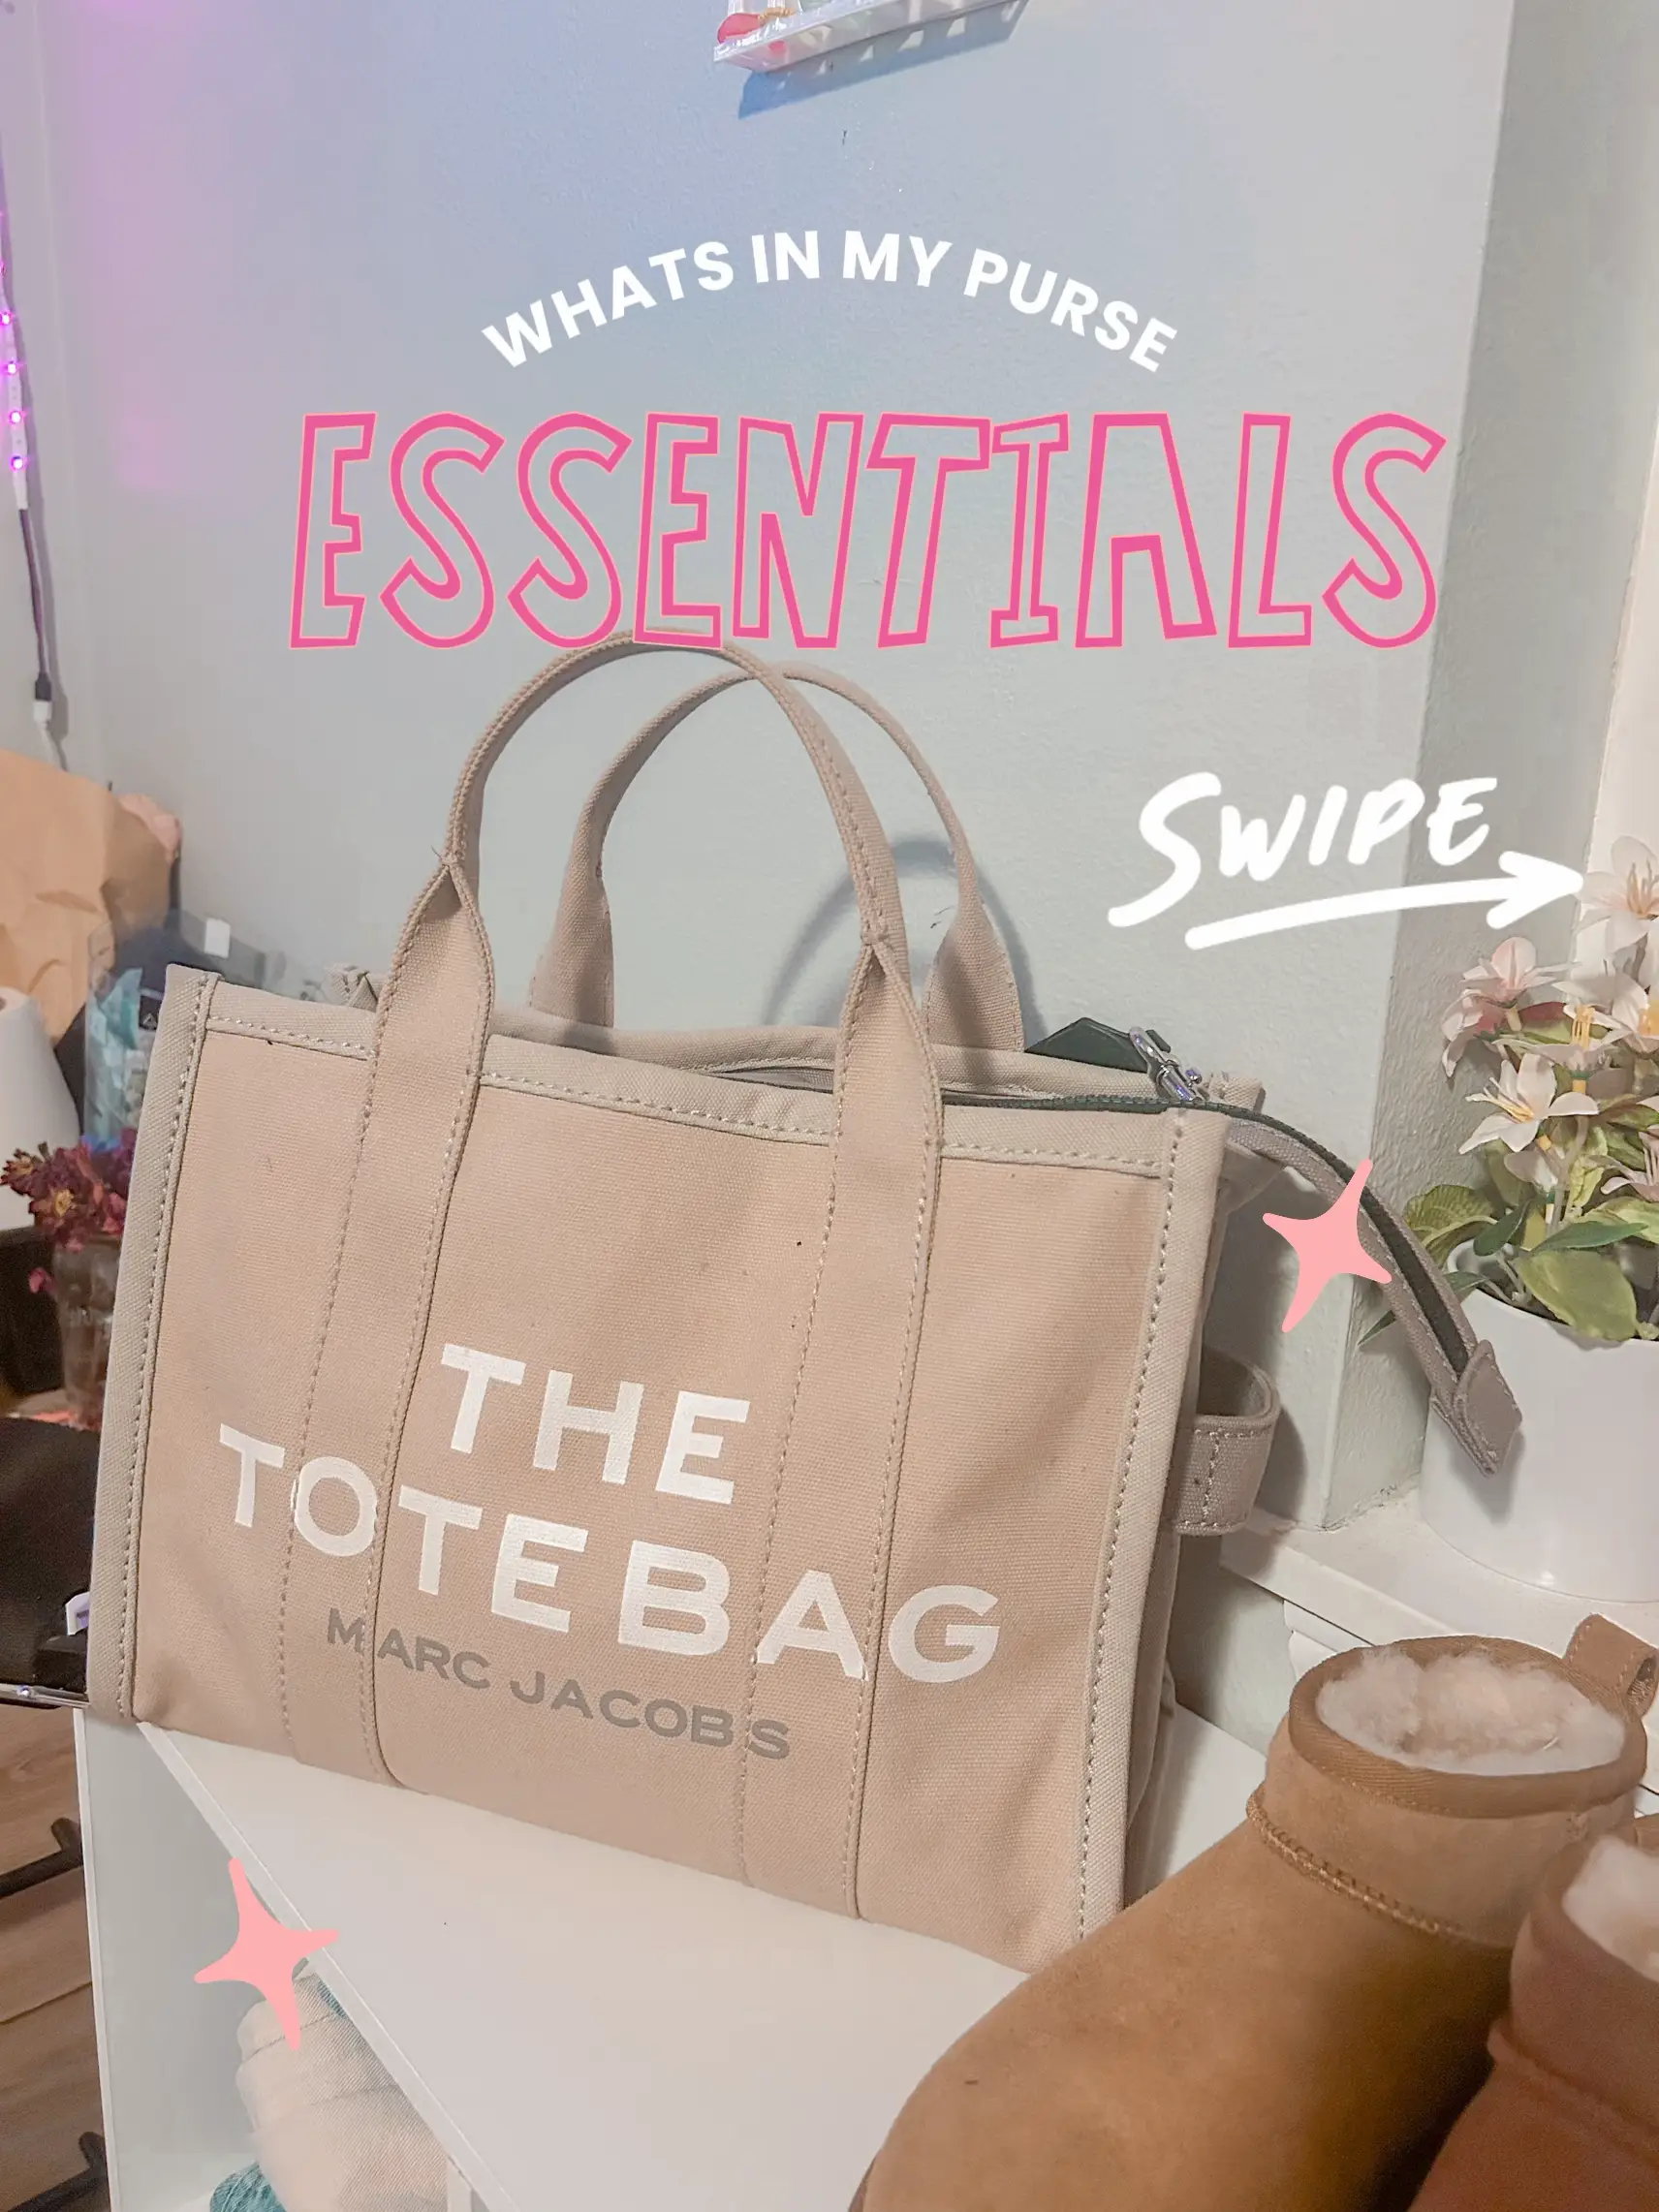 ANINE BING  The Kate Tote is finally here! It's the ultimate tote